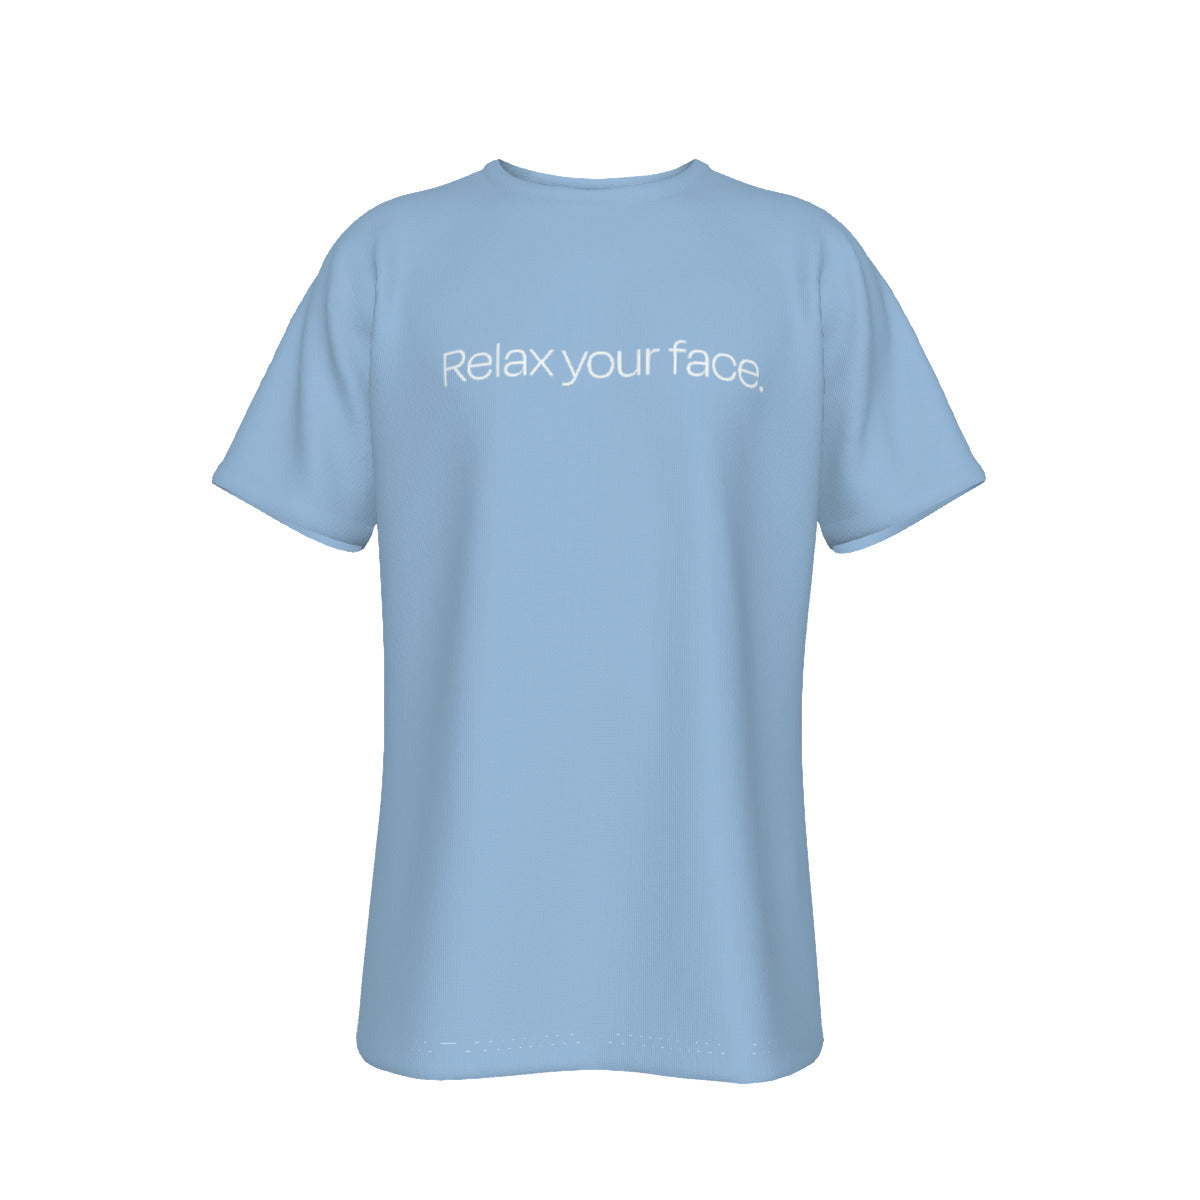 Vulfpeck VOSM Collection - Relax Your Face - Men's O-Neck T-Shirt